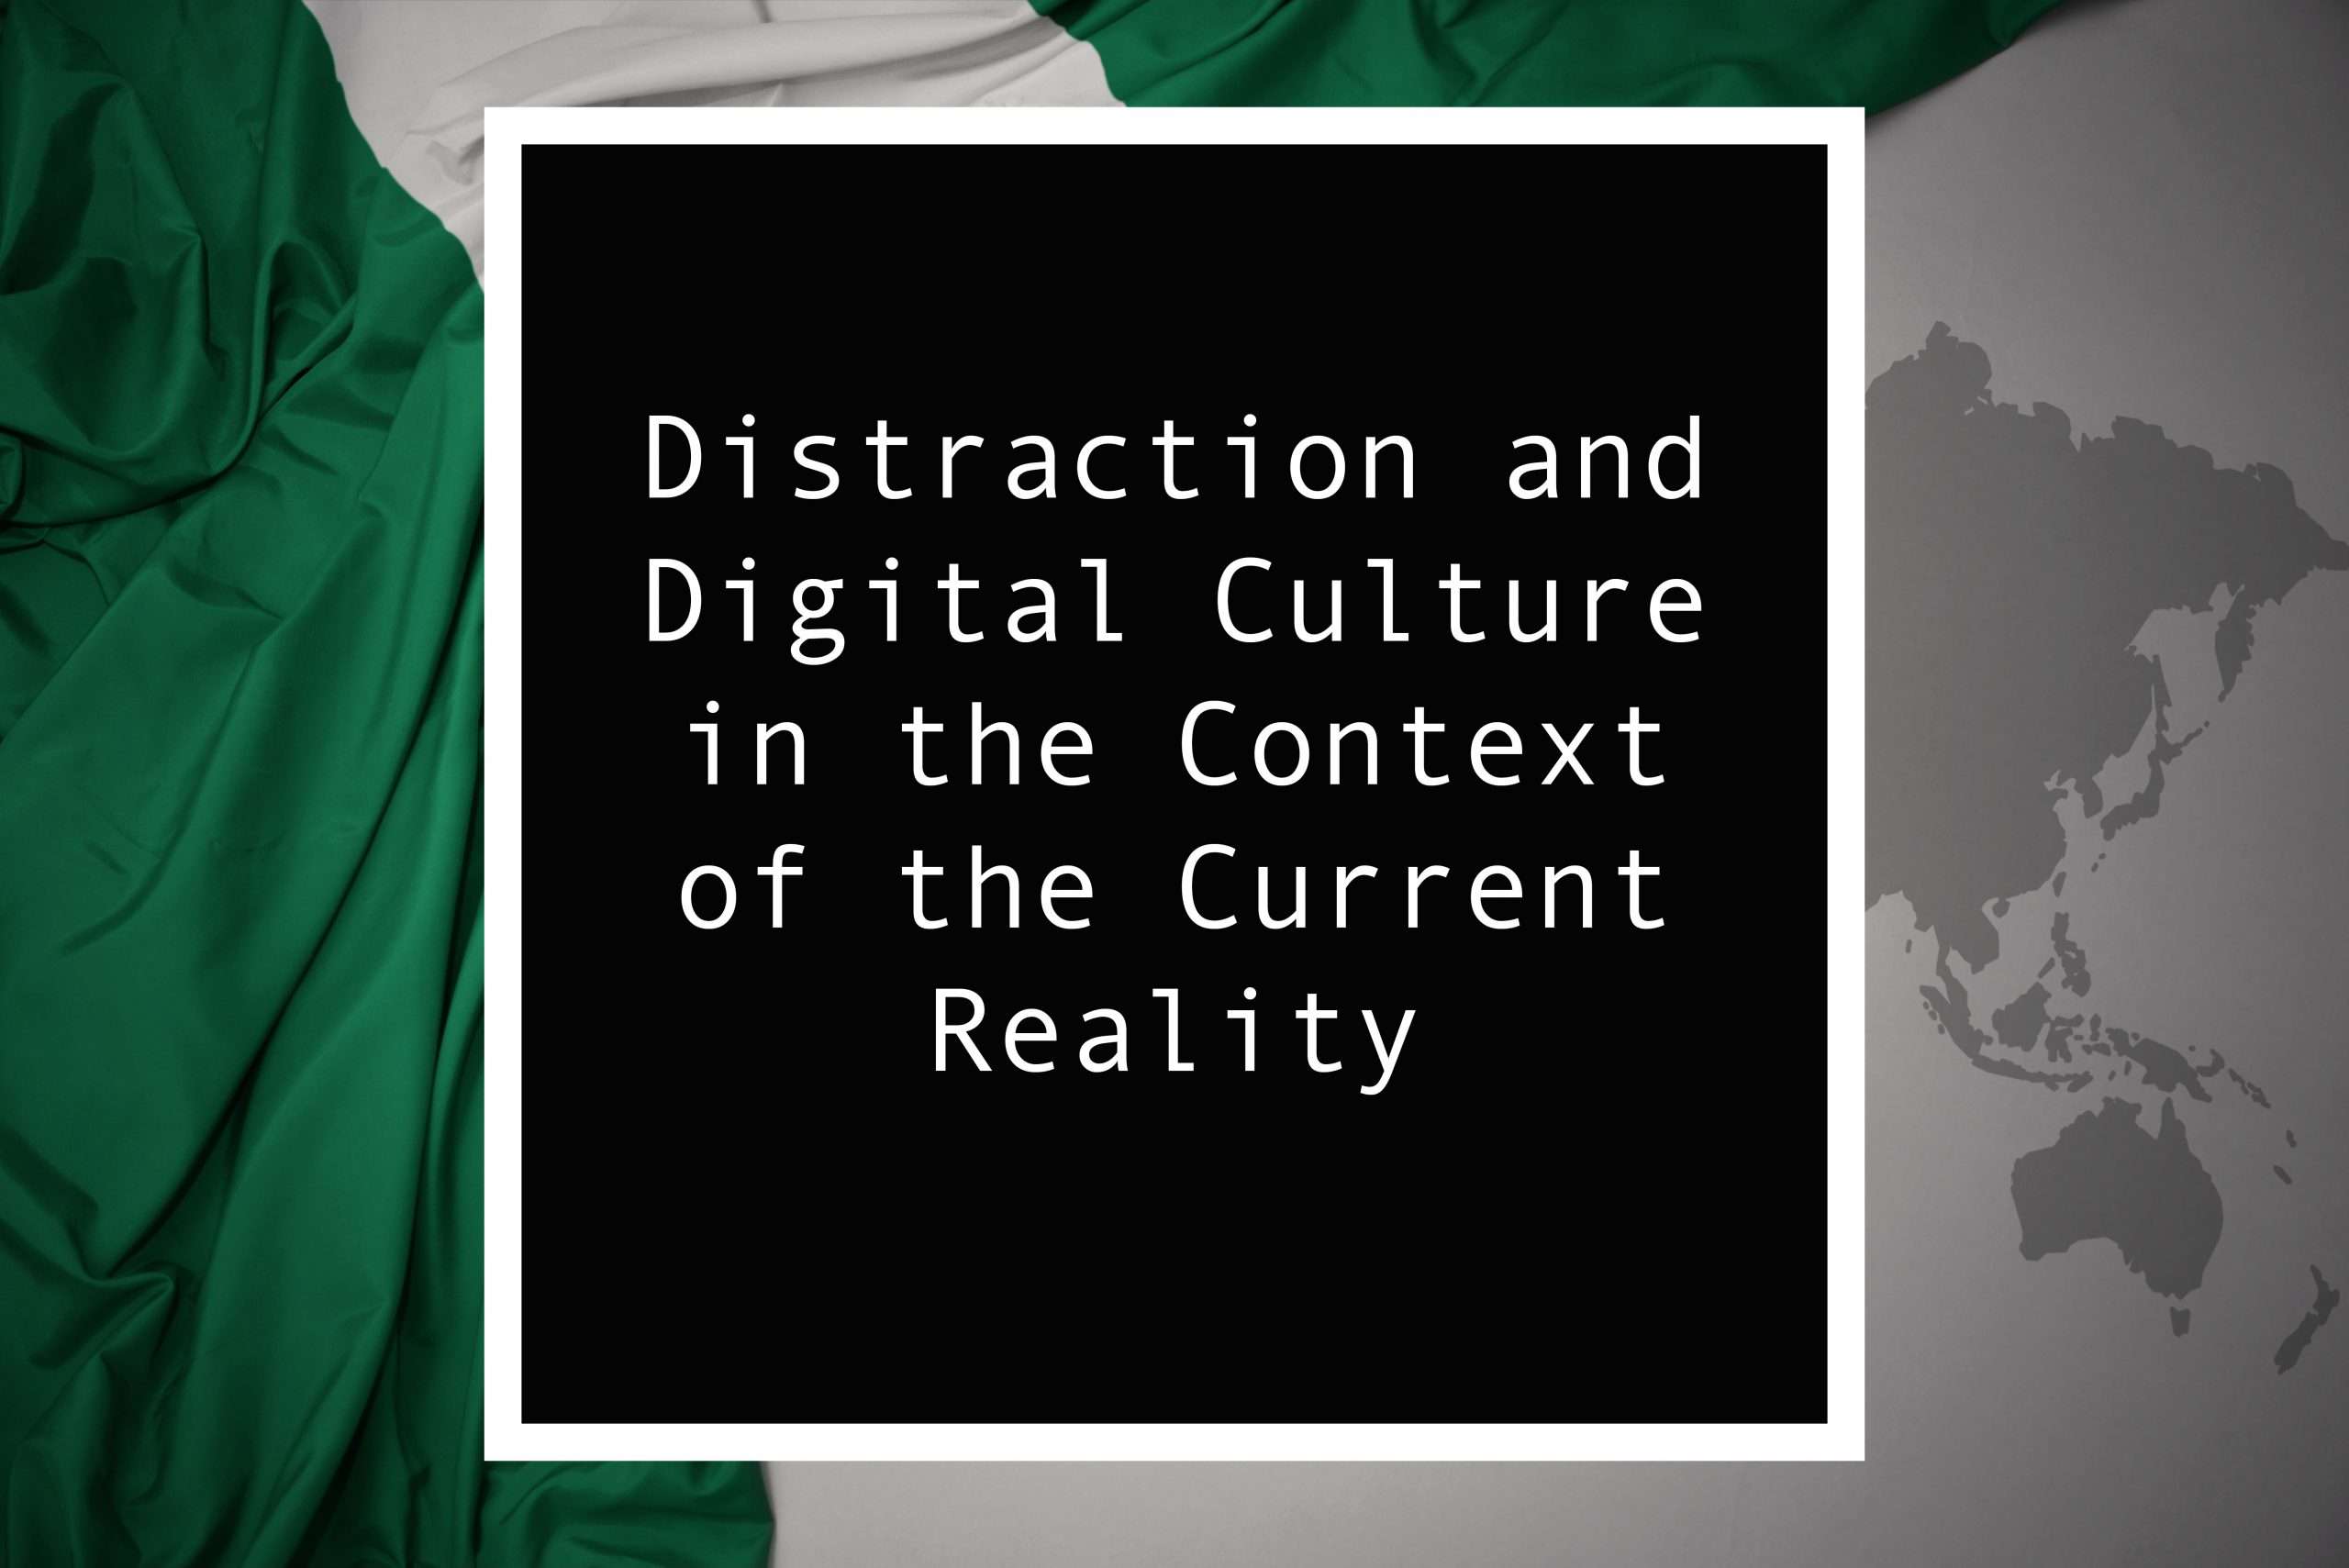 Distraction and Digital Culture in the Context of the Current Reality